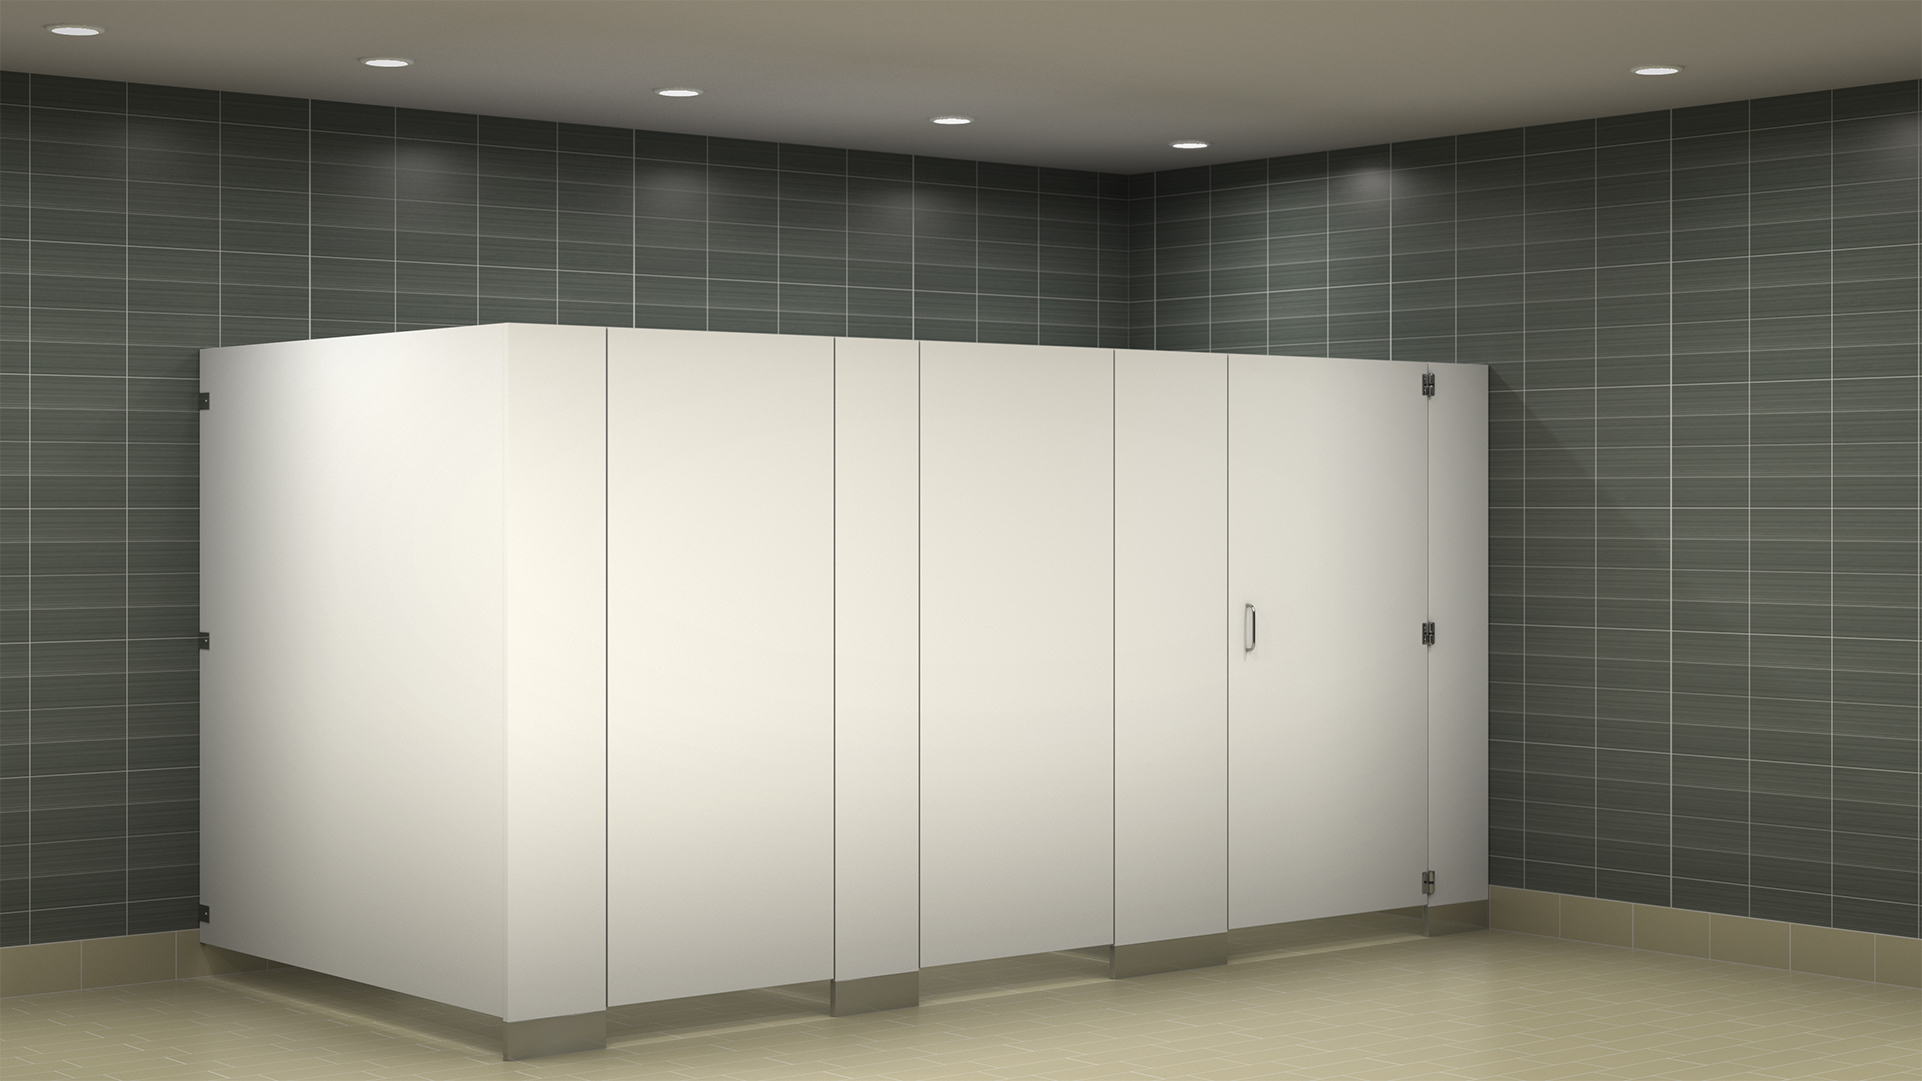 Bobrick SierraSeries Floor Anchored Toilet Partitions sold by J. Laurenzo Specialties